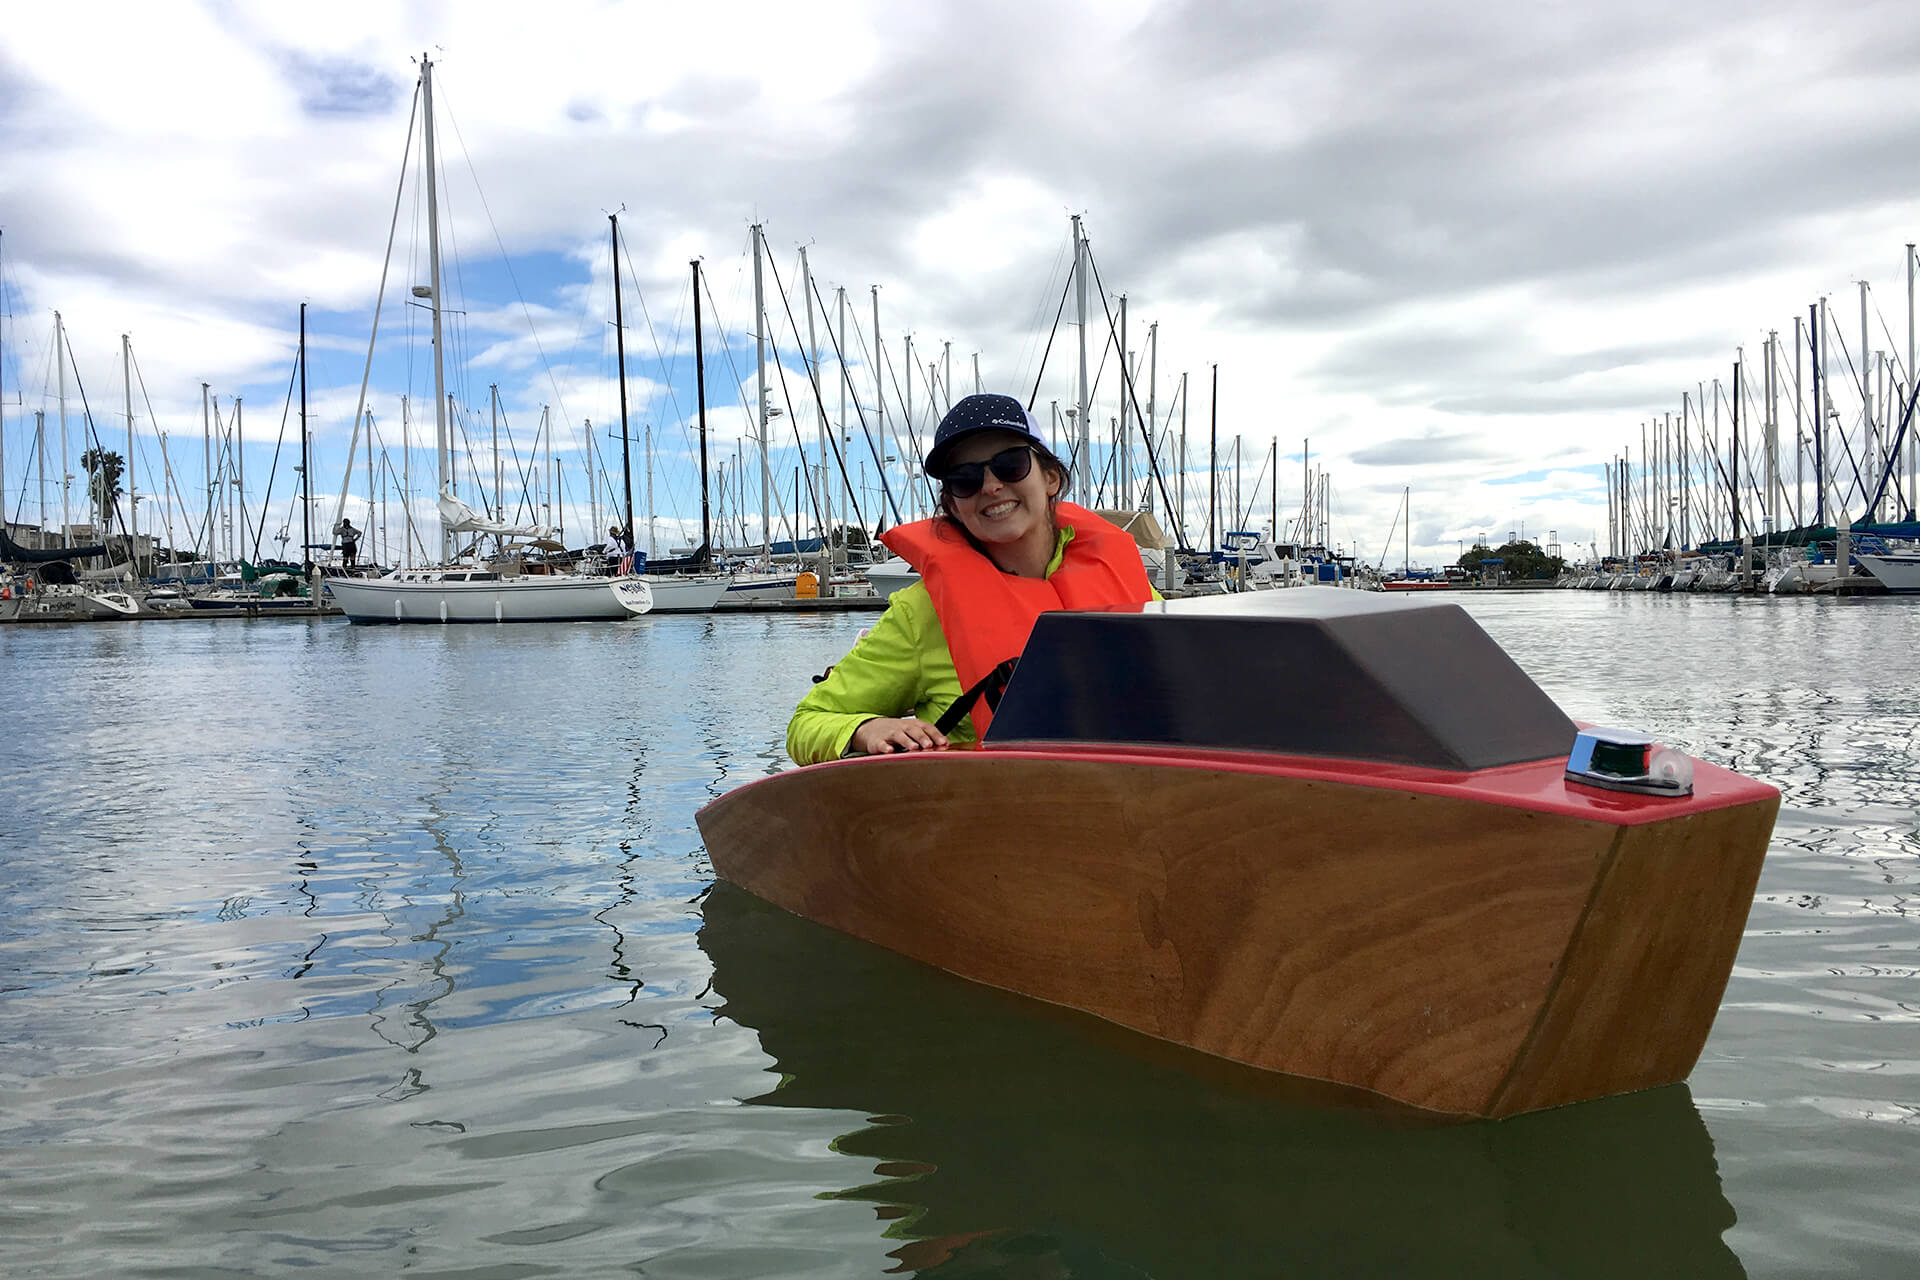 JuliAnn showing off the mini boat at the Emeryville harbor